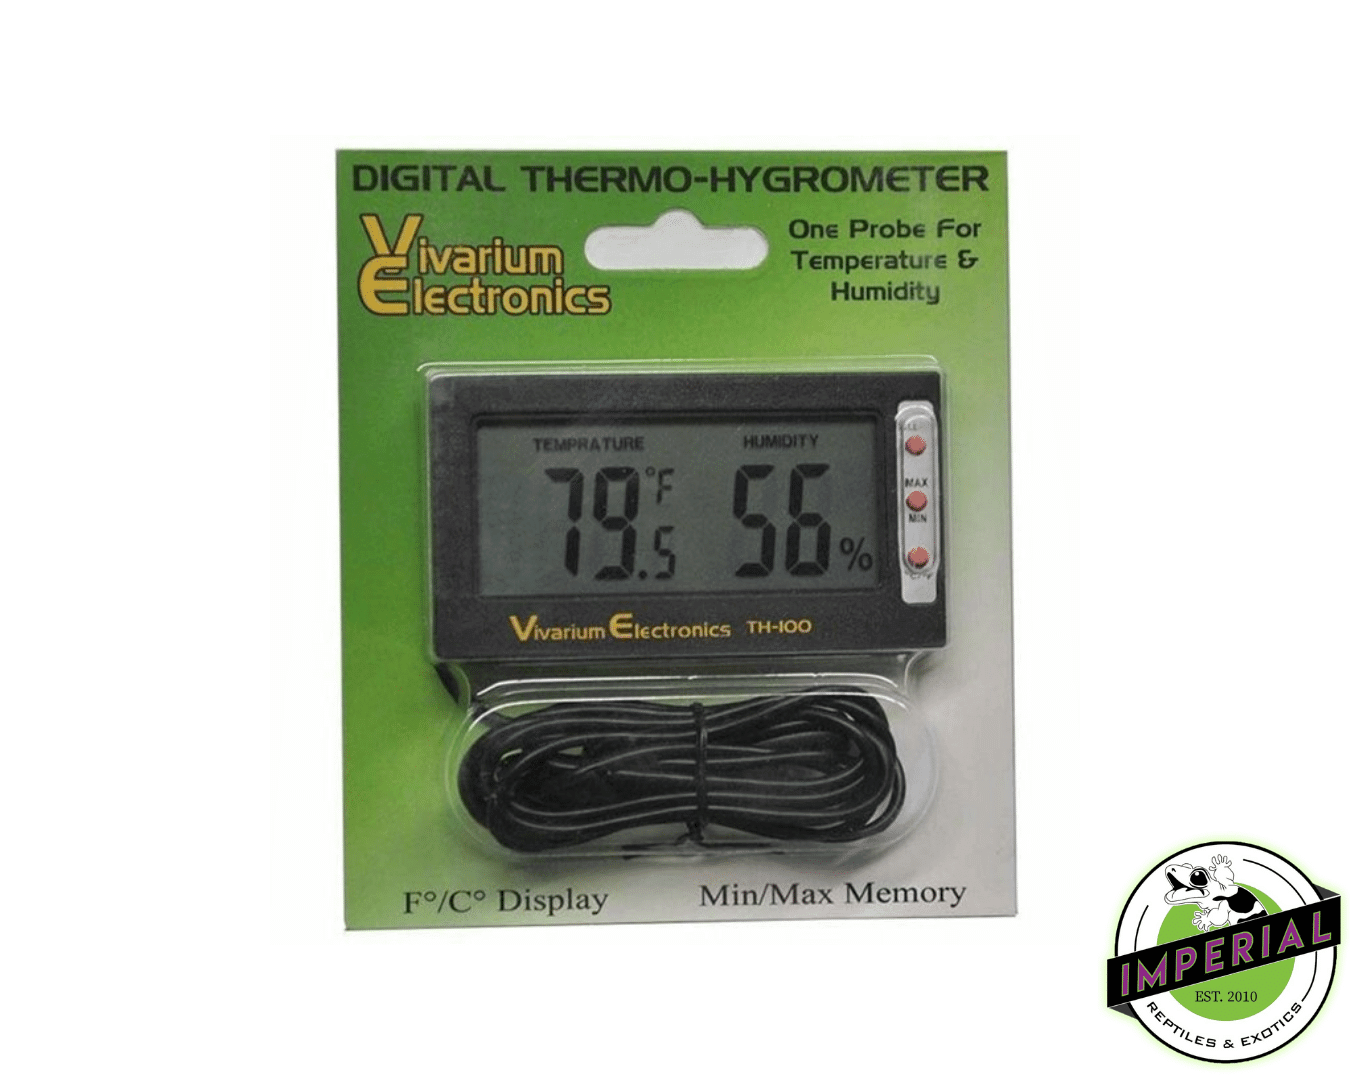 reptile digital thermometer for sale online, buy cheap reptile supplies near me